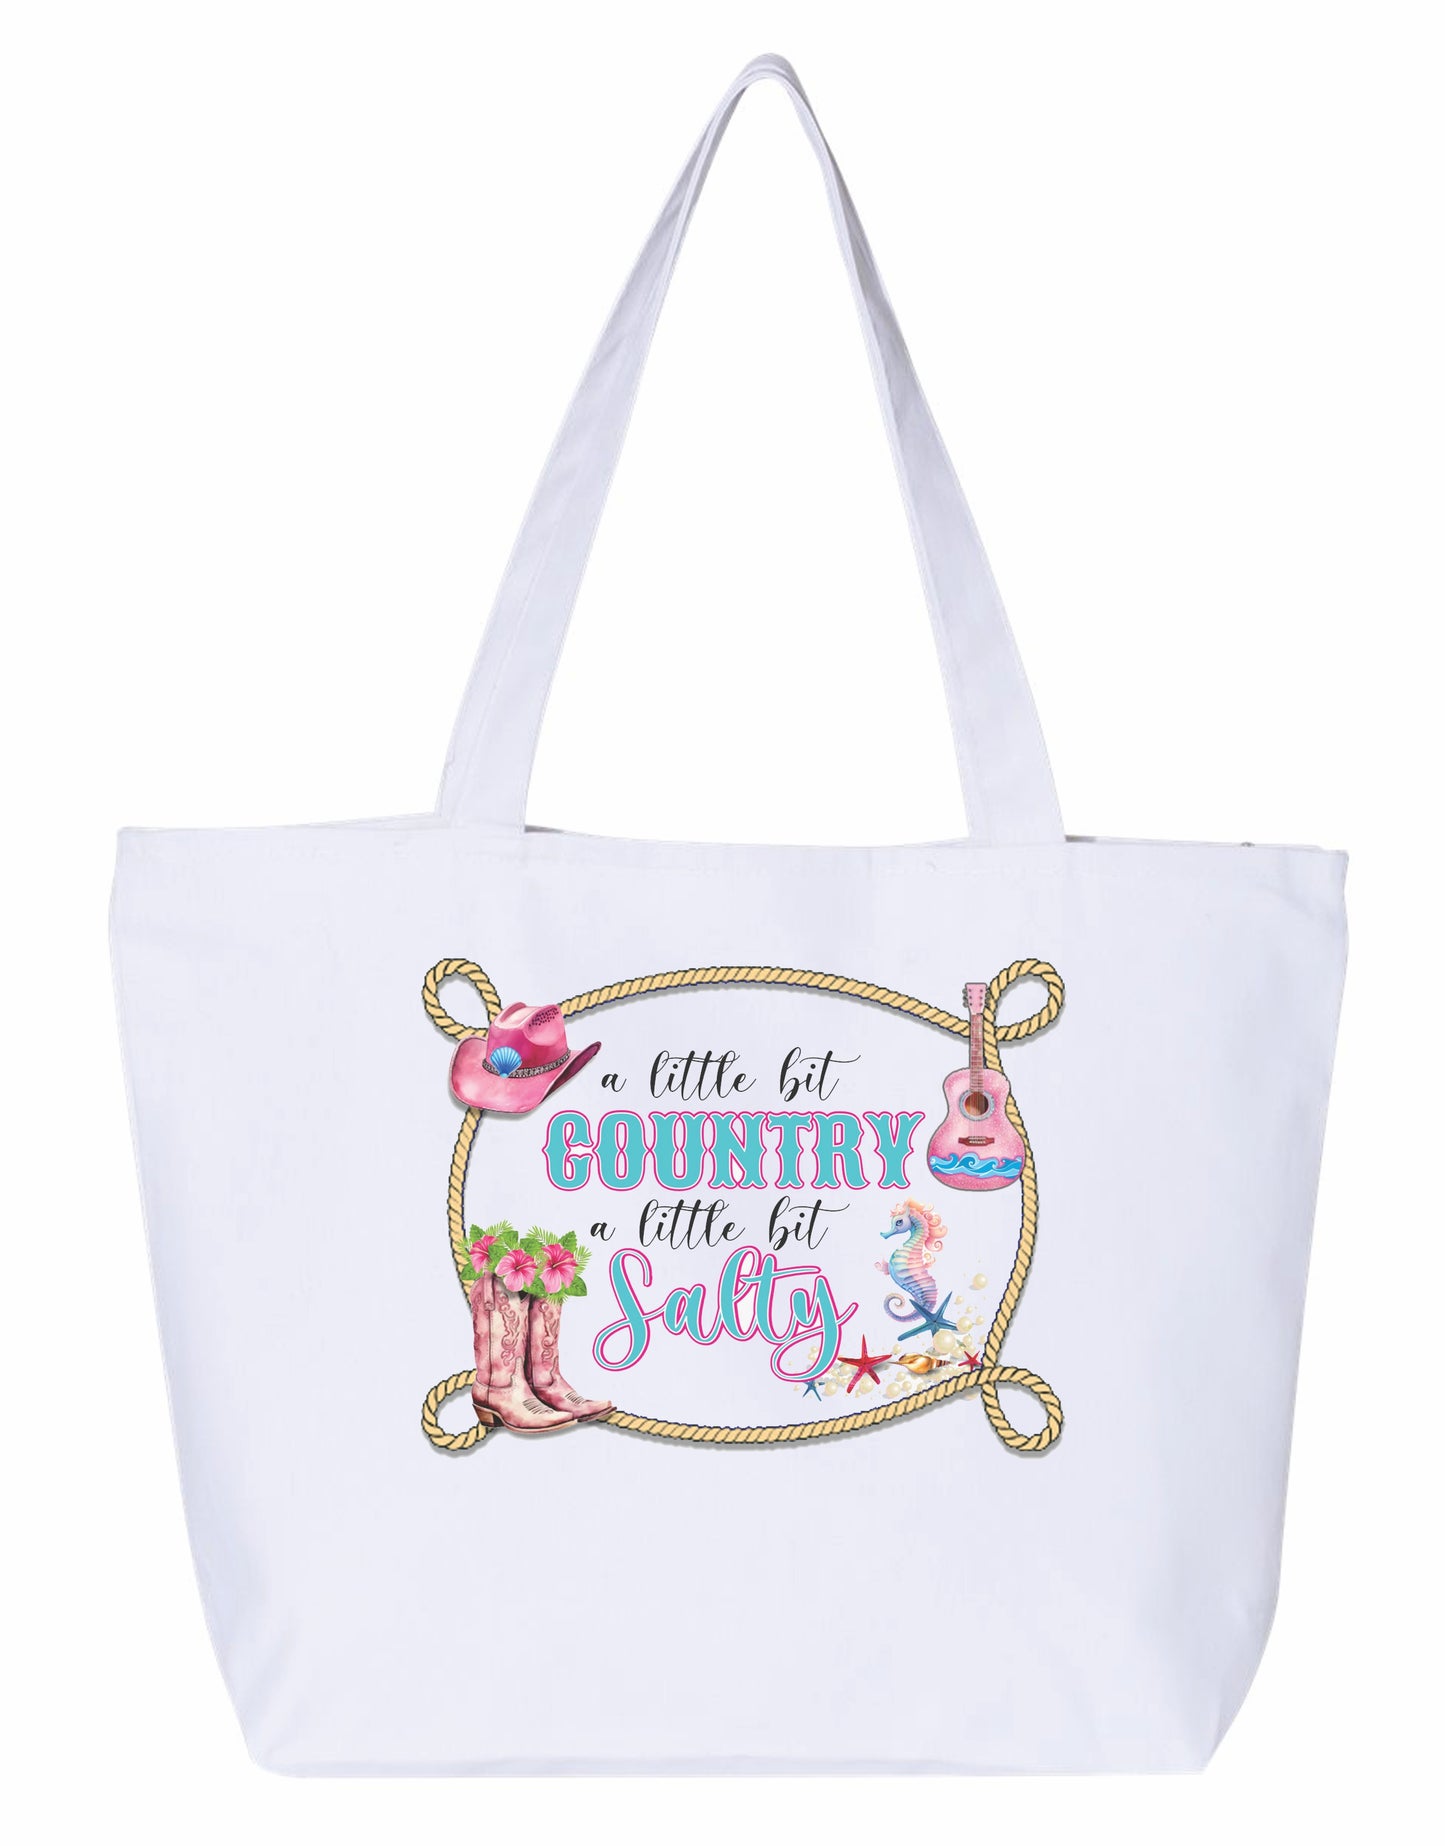 a little bit country a little bit salty Heavy weight cotton canvas large zippered  tote bag